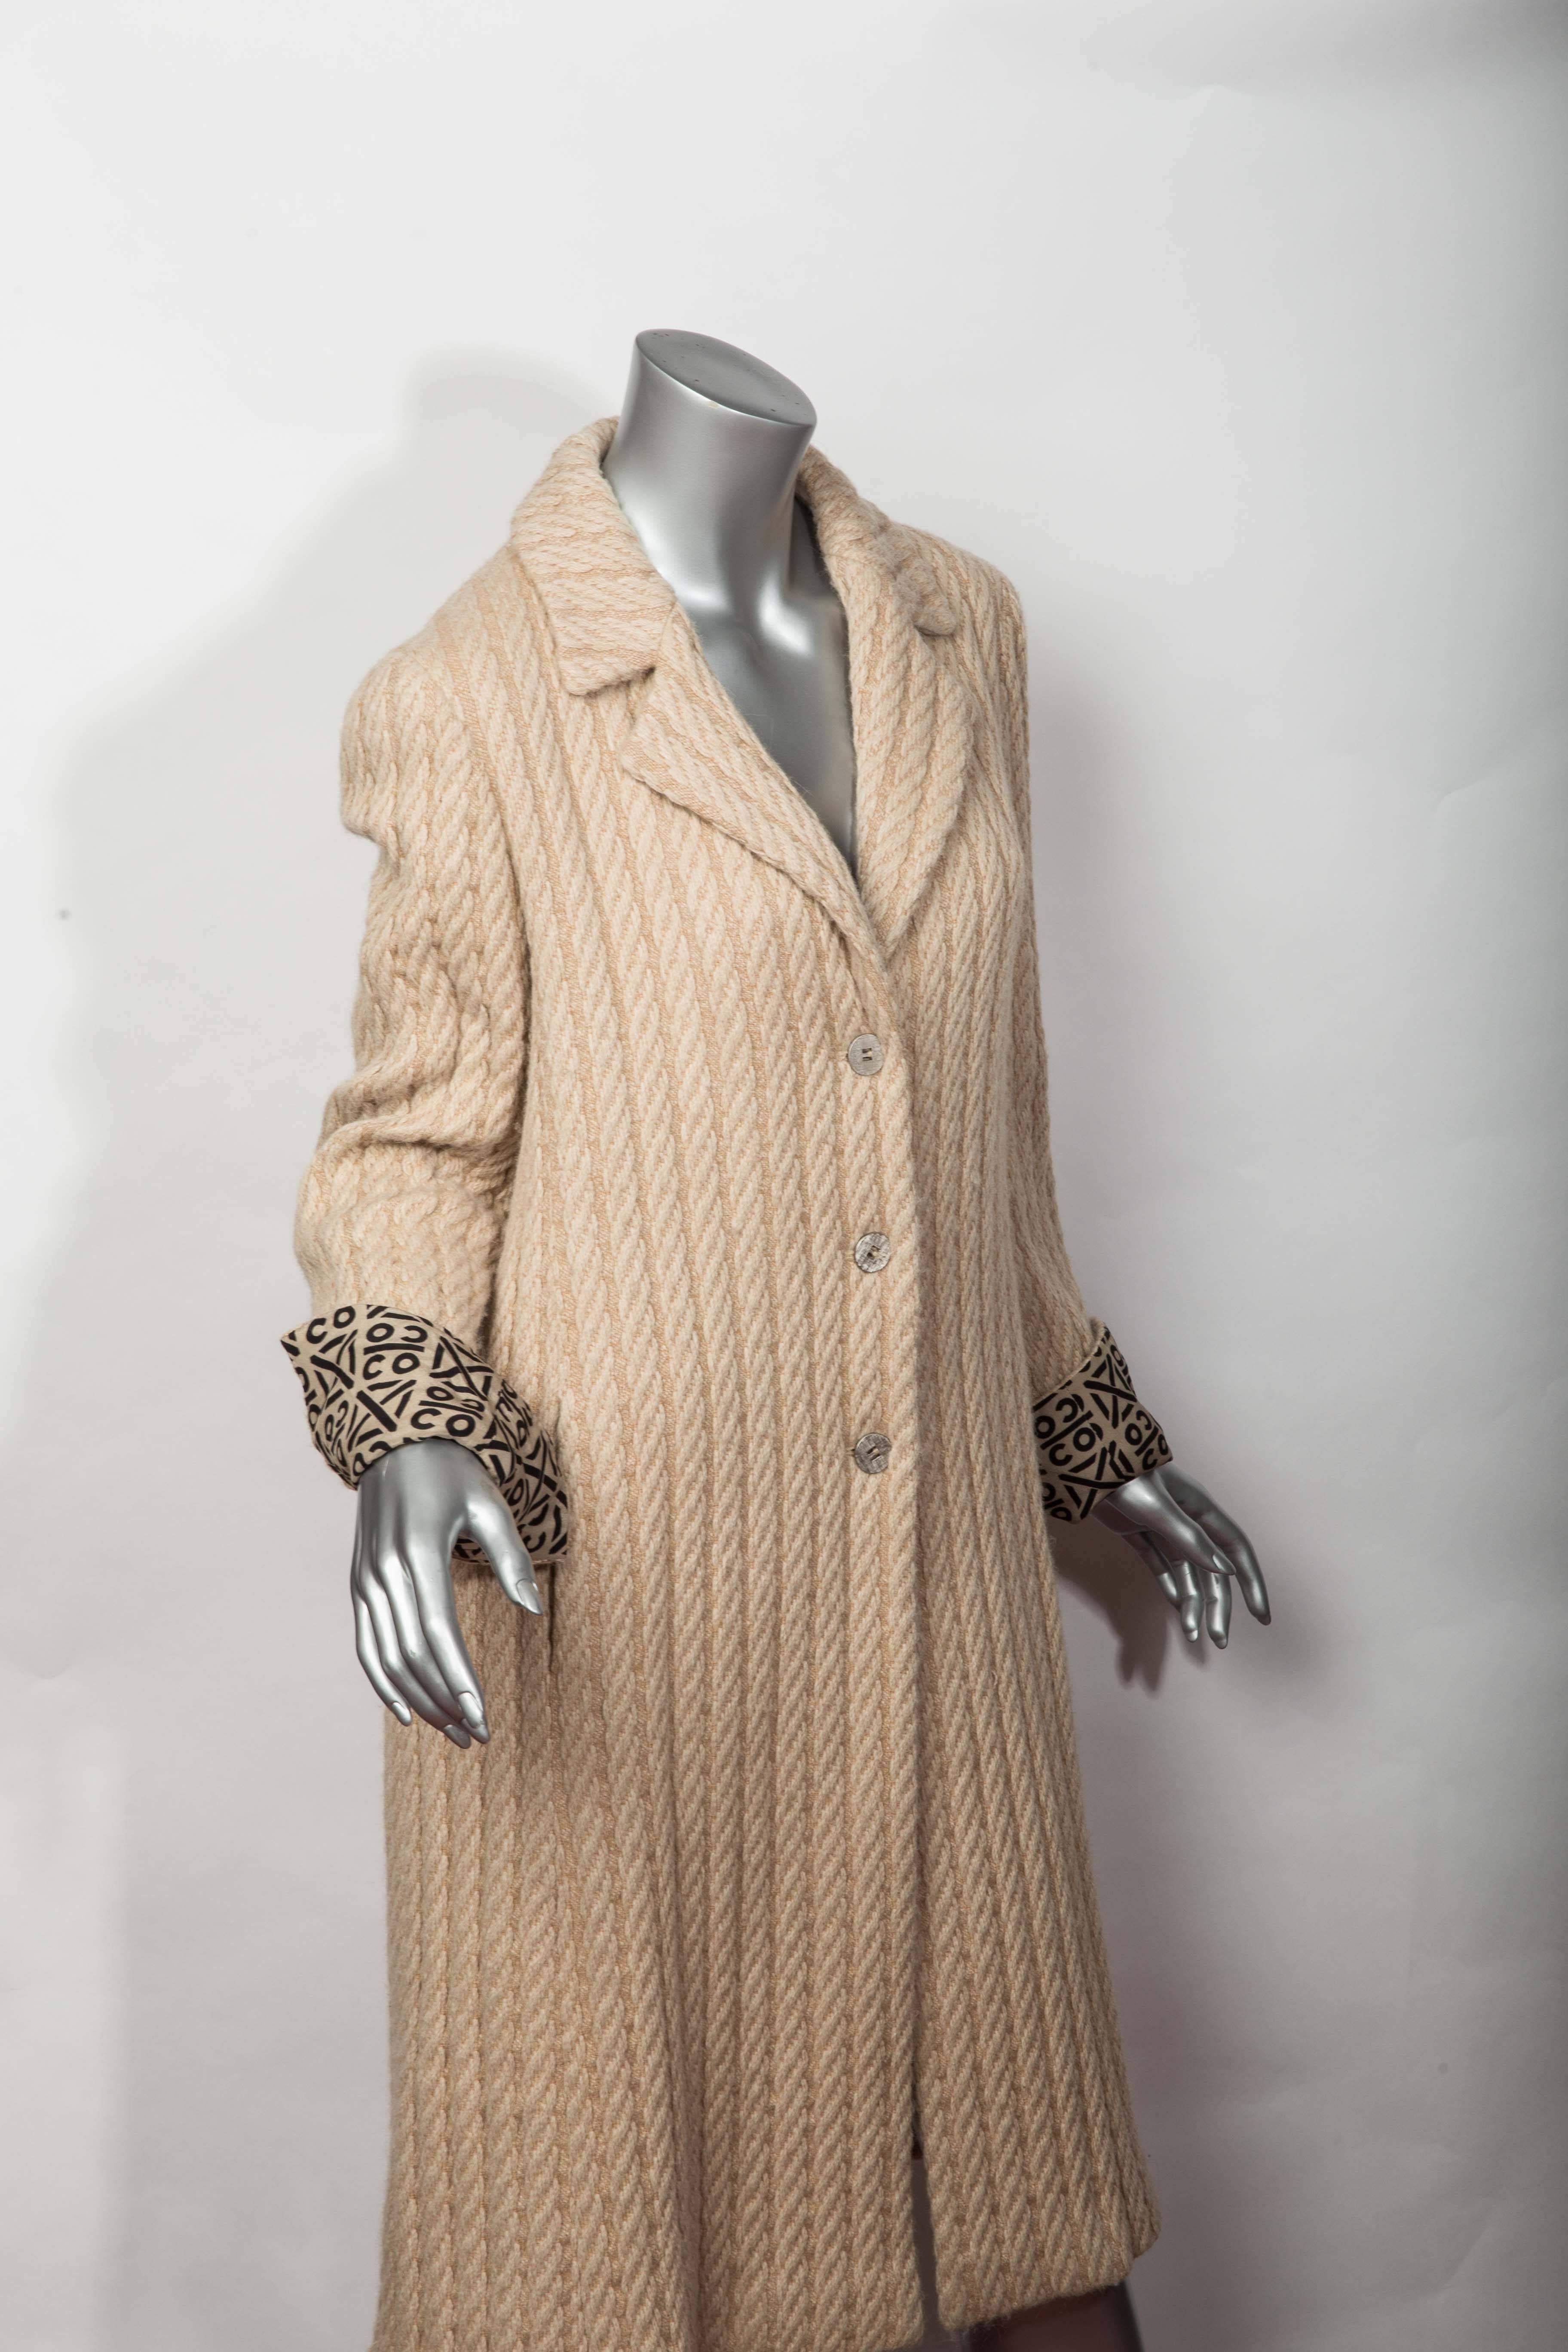 Cream Chanel Cable Alpaca / Wool Coat with Iconic COCO Black and Brown Silk Lining.
Cuffs Fold Over to Reveal Lining.
Notch Lapel with 3 Buttons Down the Front. 
Size 38. Excellent Condition.